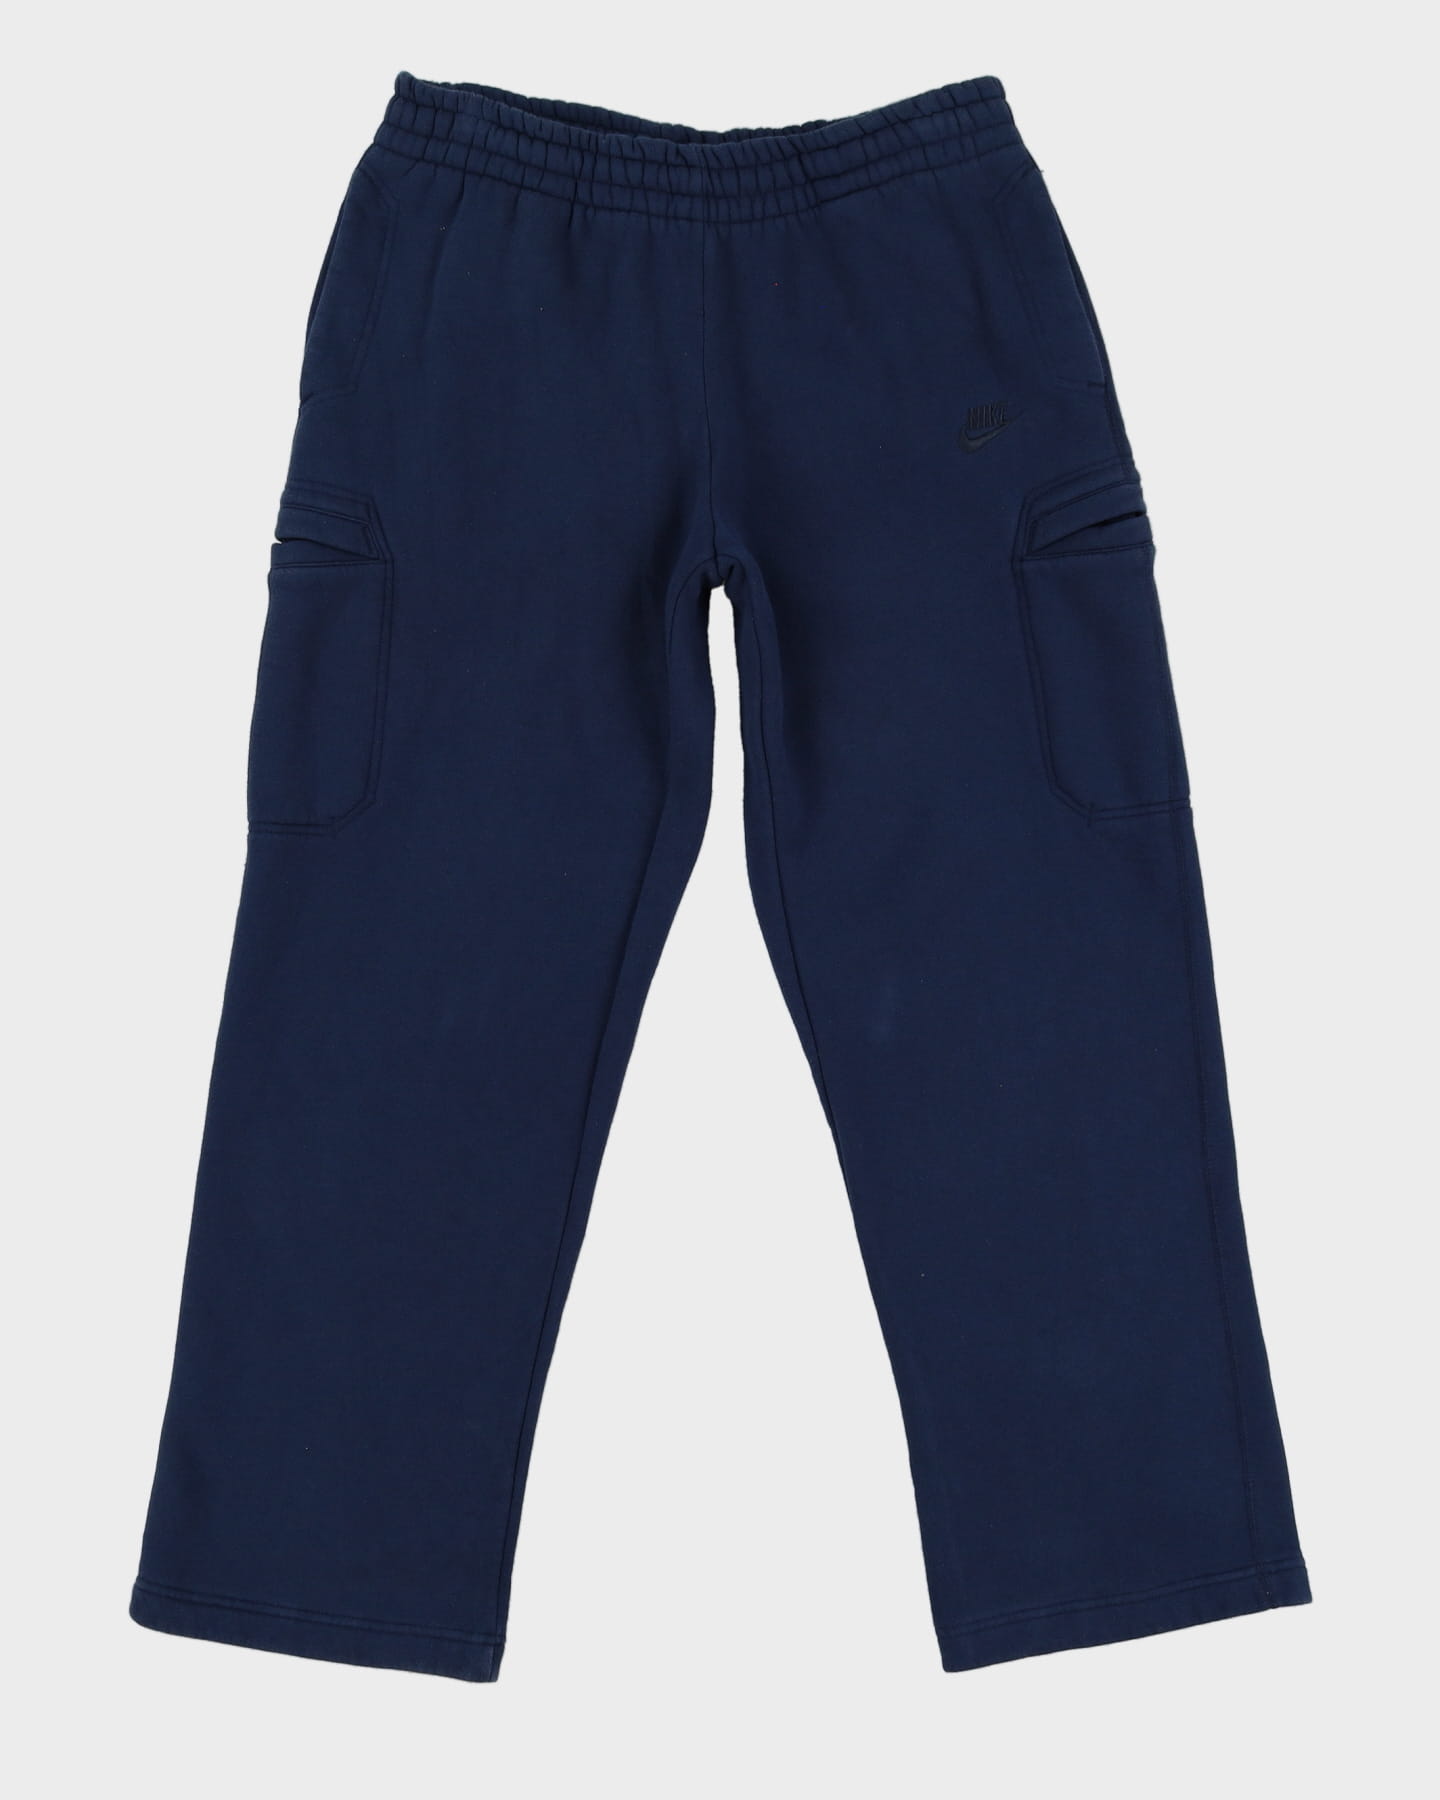 00s Nike Navy Cargo Style Tracksuit Bottoms - M